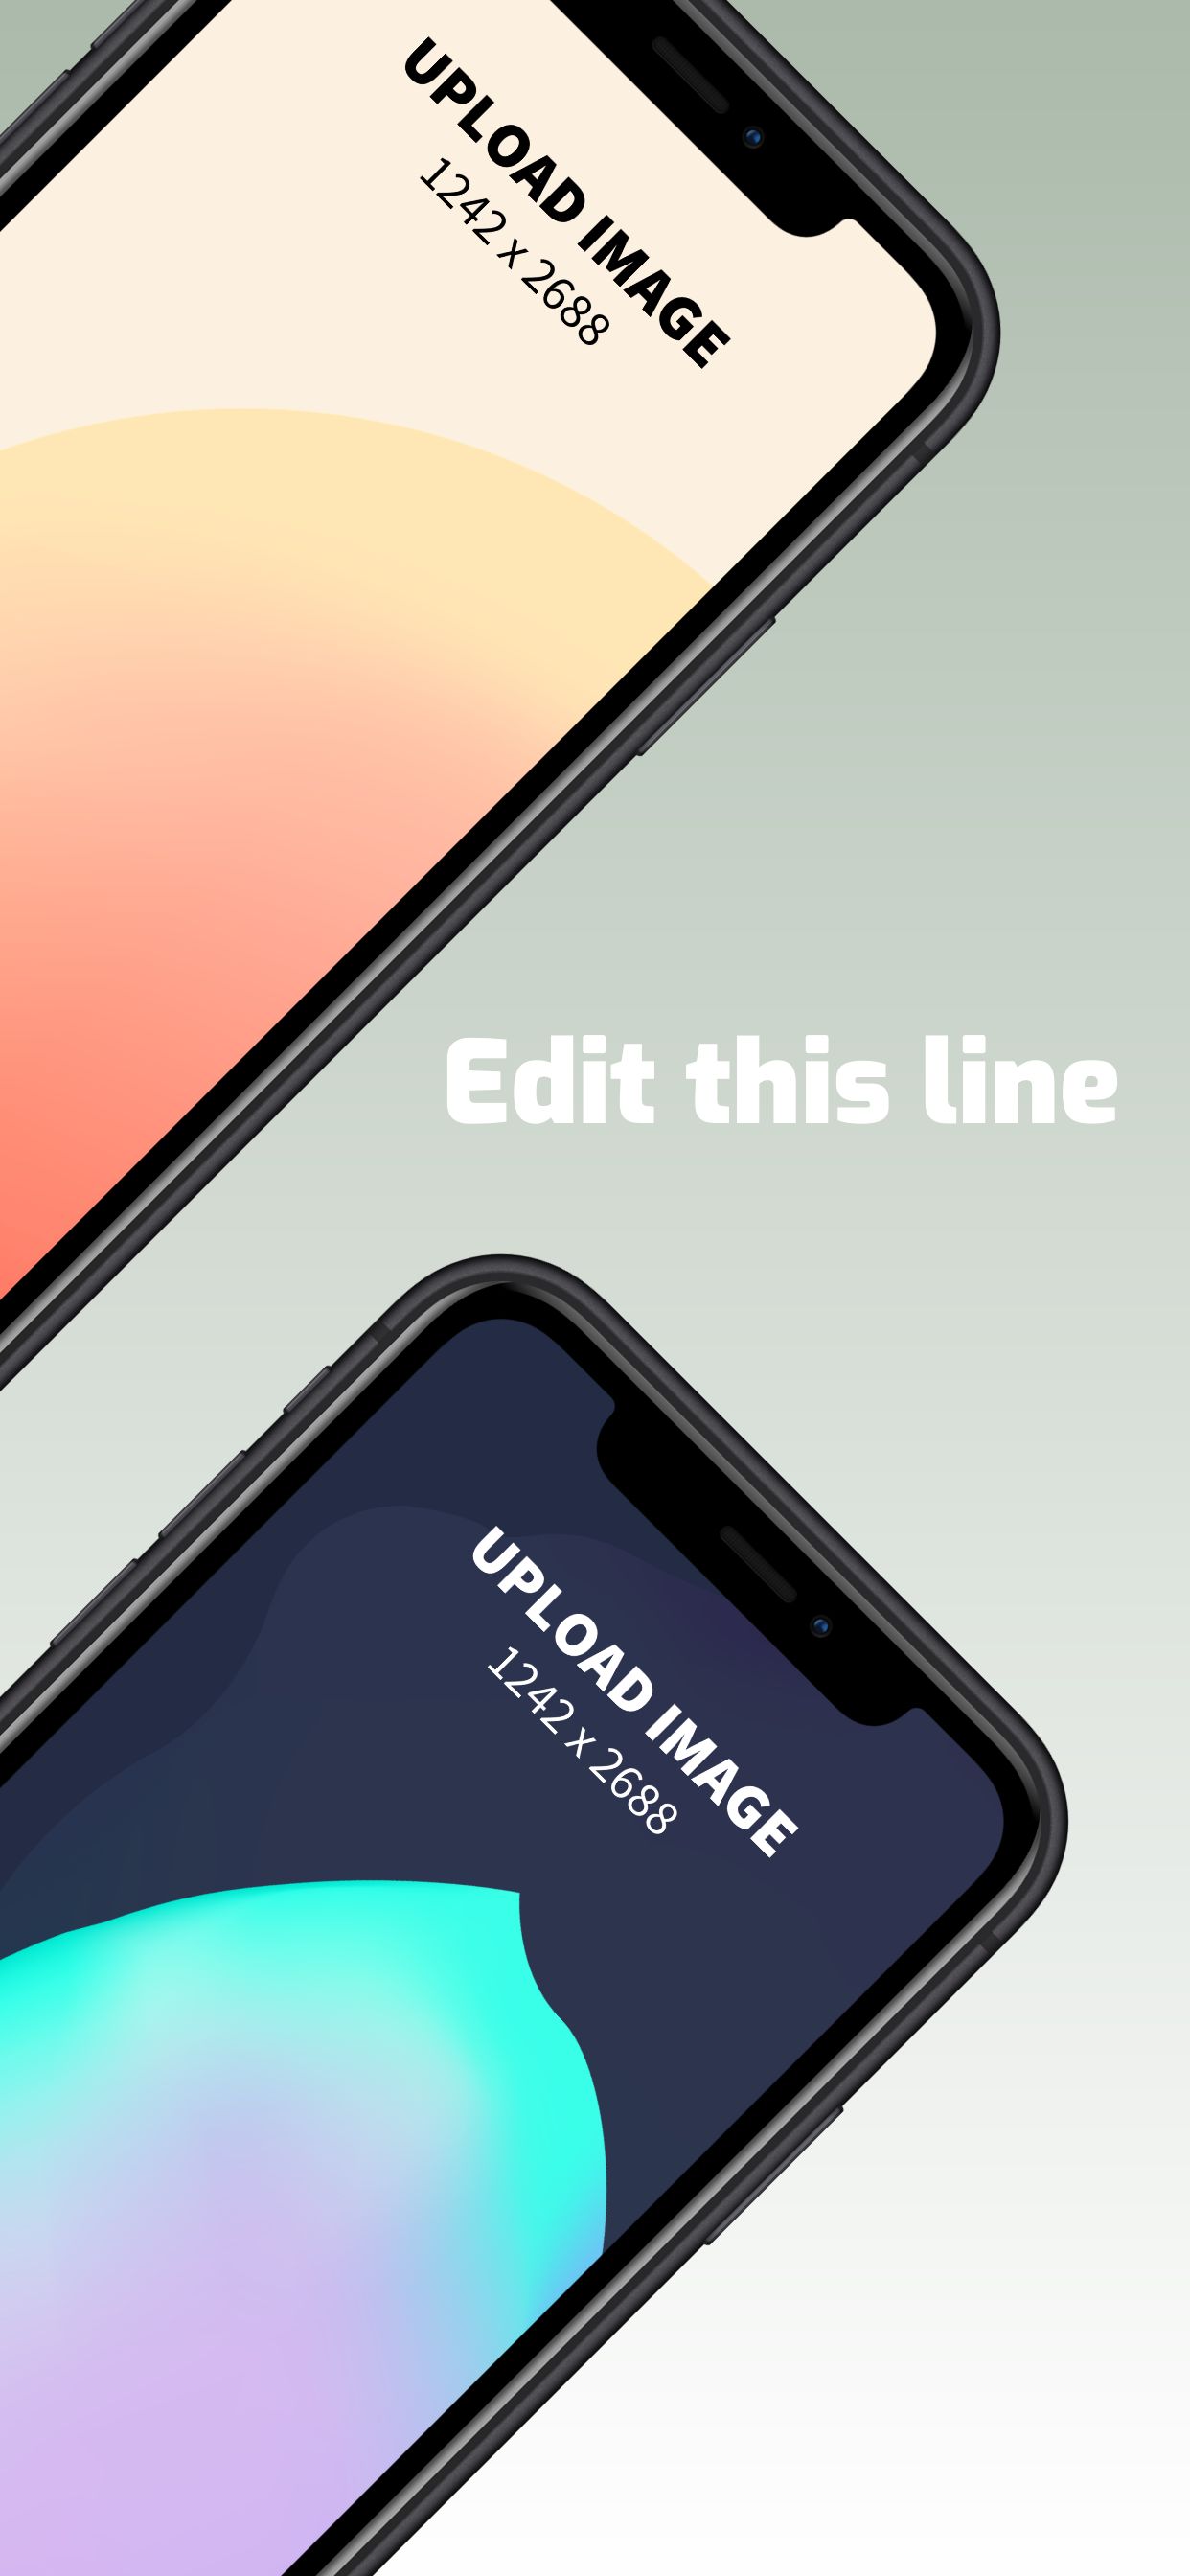 iPhone XS Max Screenshot 13 template. Quickly edit fonts, text, colors, and more for free.